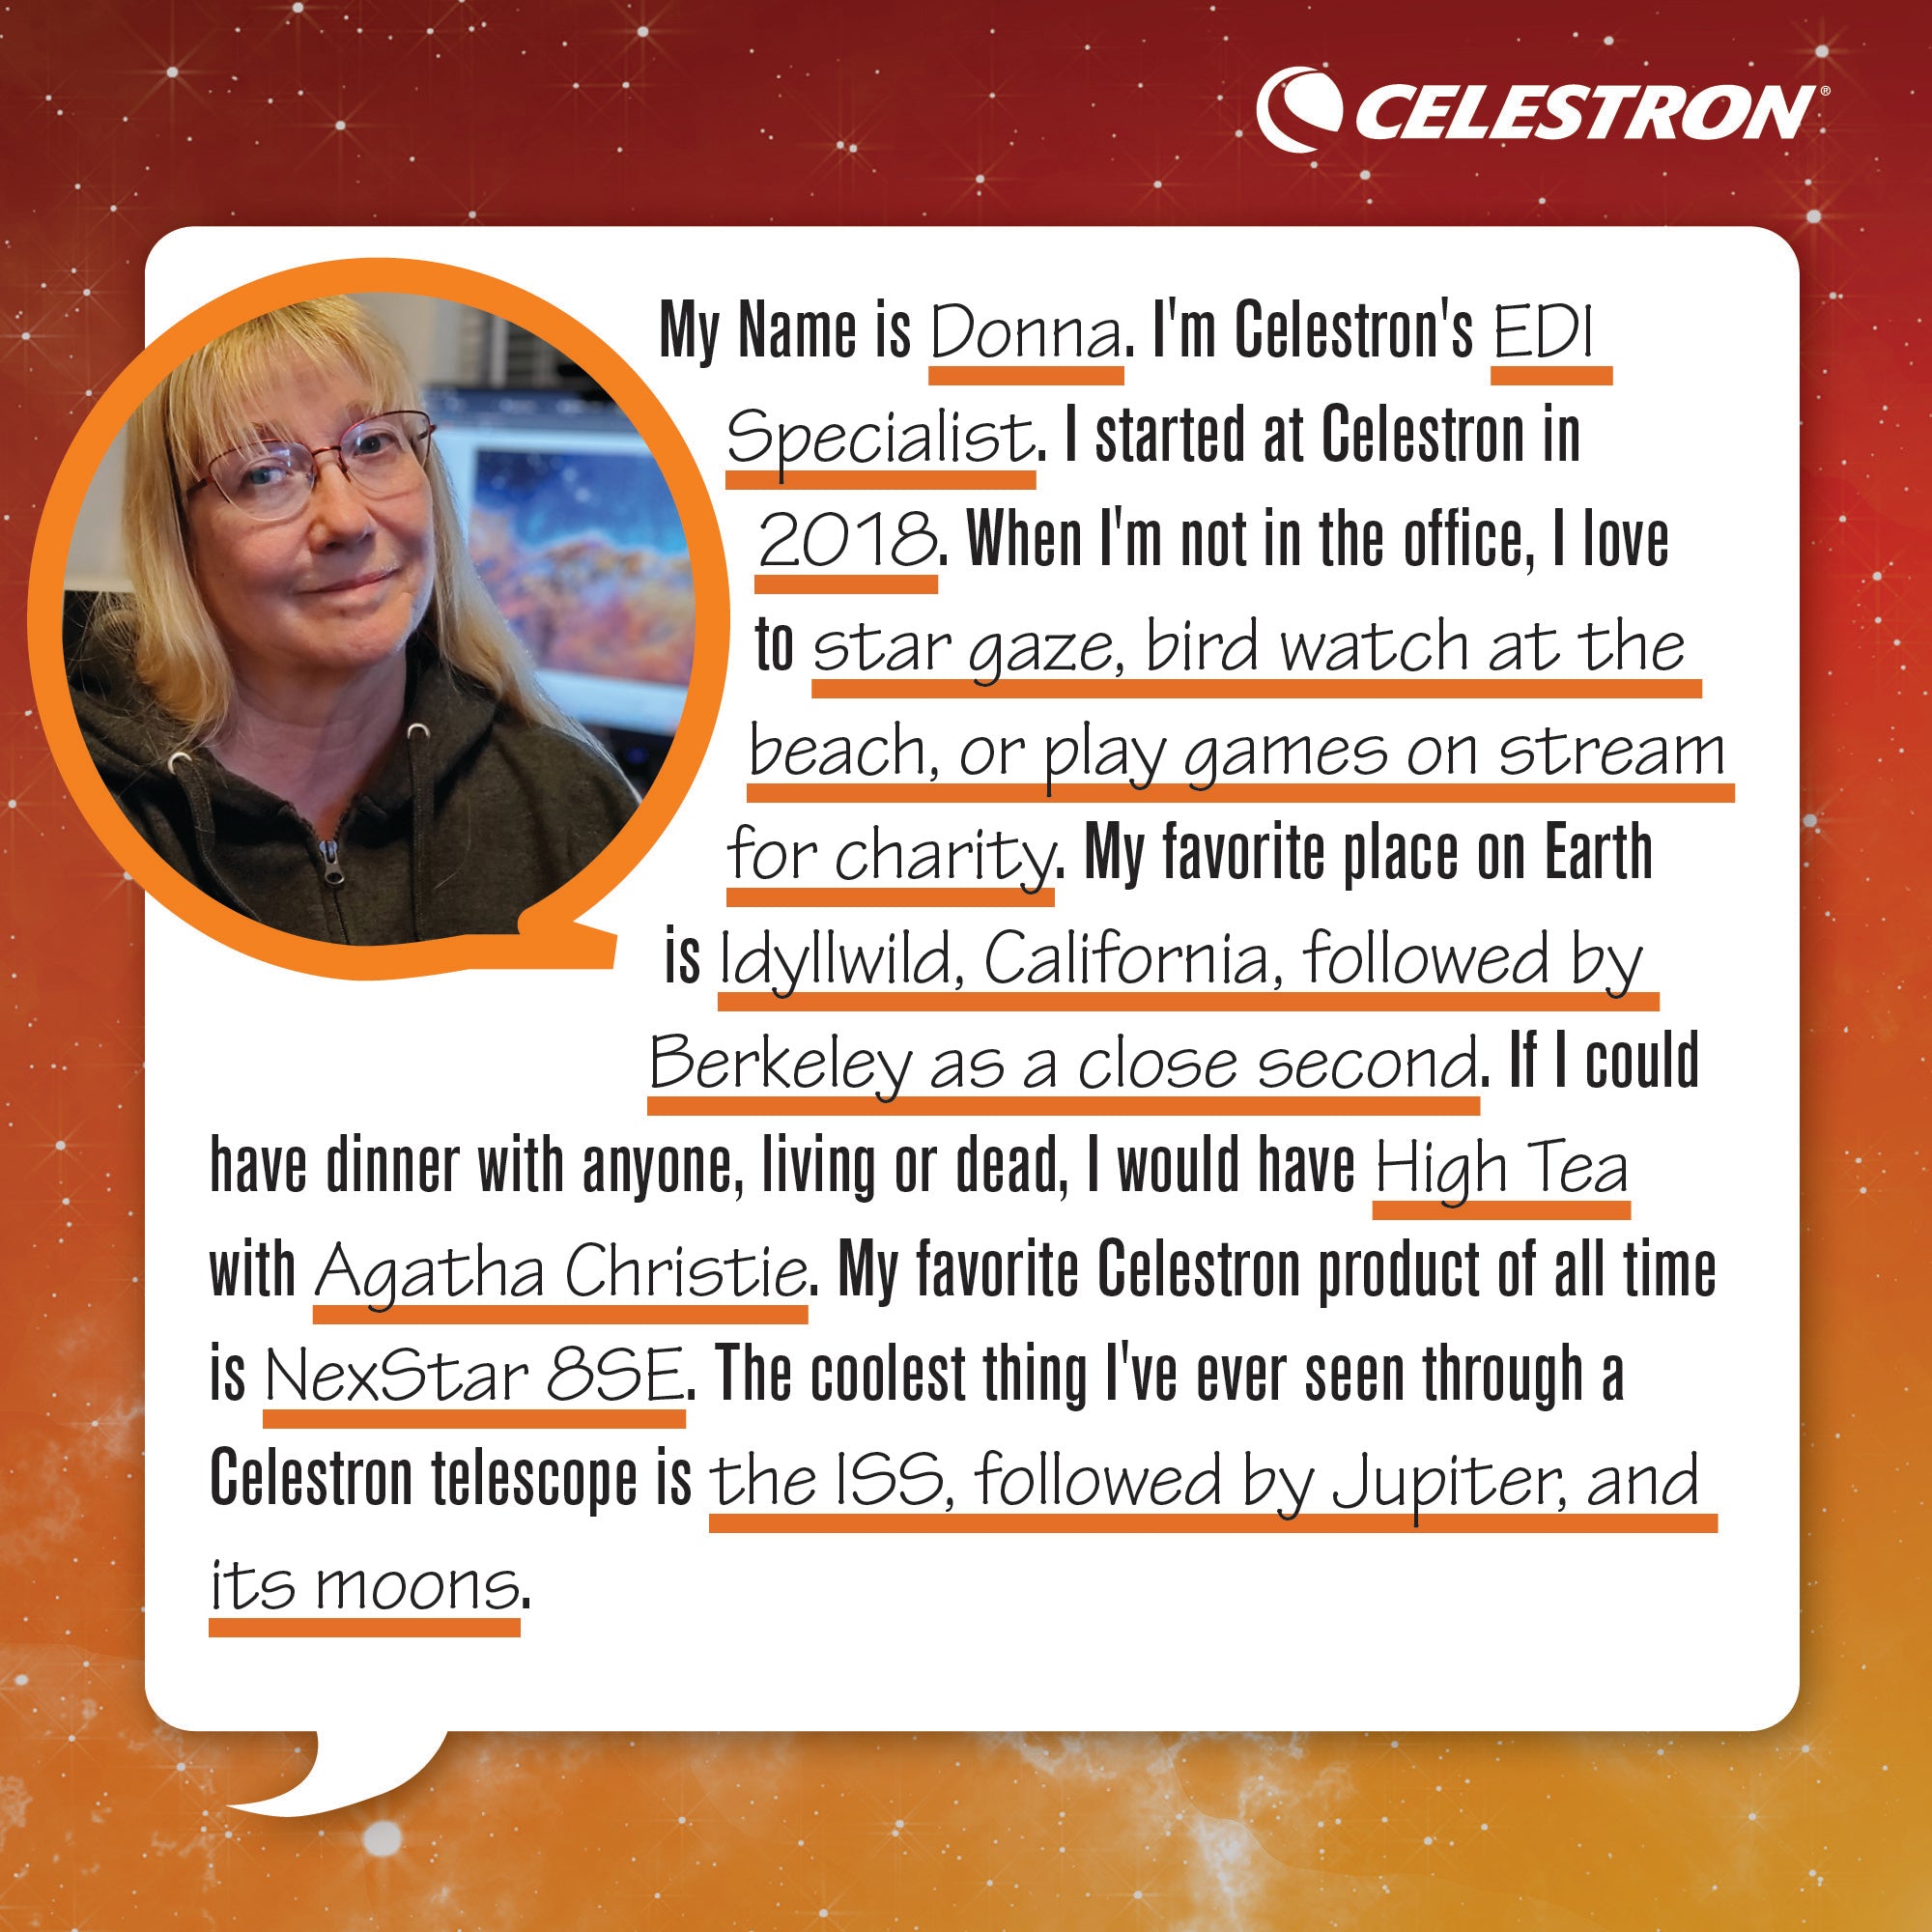 My name is Donna. I'm a Celestron's EDI Specialist. I started at Celestron in 2018. When I'm not in the office, I love to stargaze, bird watch at the beach, and play games on stream for charity.  My favorite place on Earth is Idyllwild, California, followed by Berkeley as a close second. If I could have dinner with anyone, living or dead, I would have high tea with Agatha Christie. My favorite Celestron product of all time is the NexStar 8SE. The coolest thing I've ever seen through a Celestron telescope is the ISS, followed by Jupiter, and its moons.